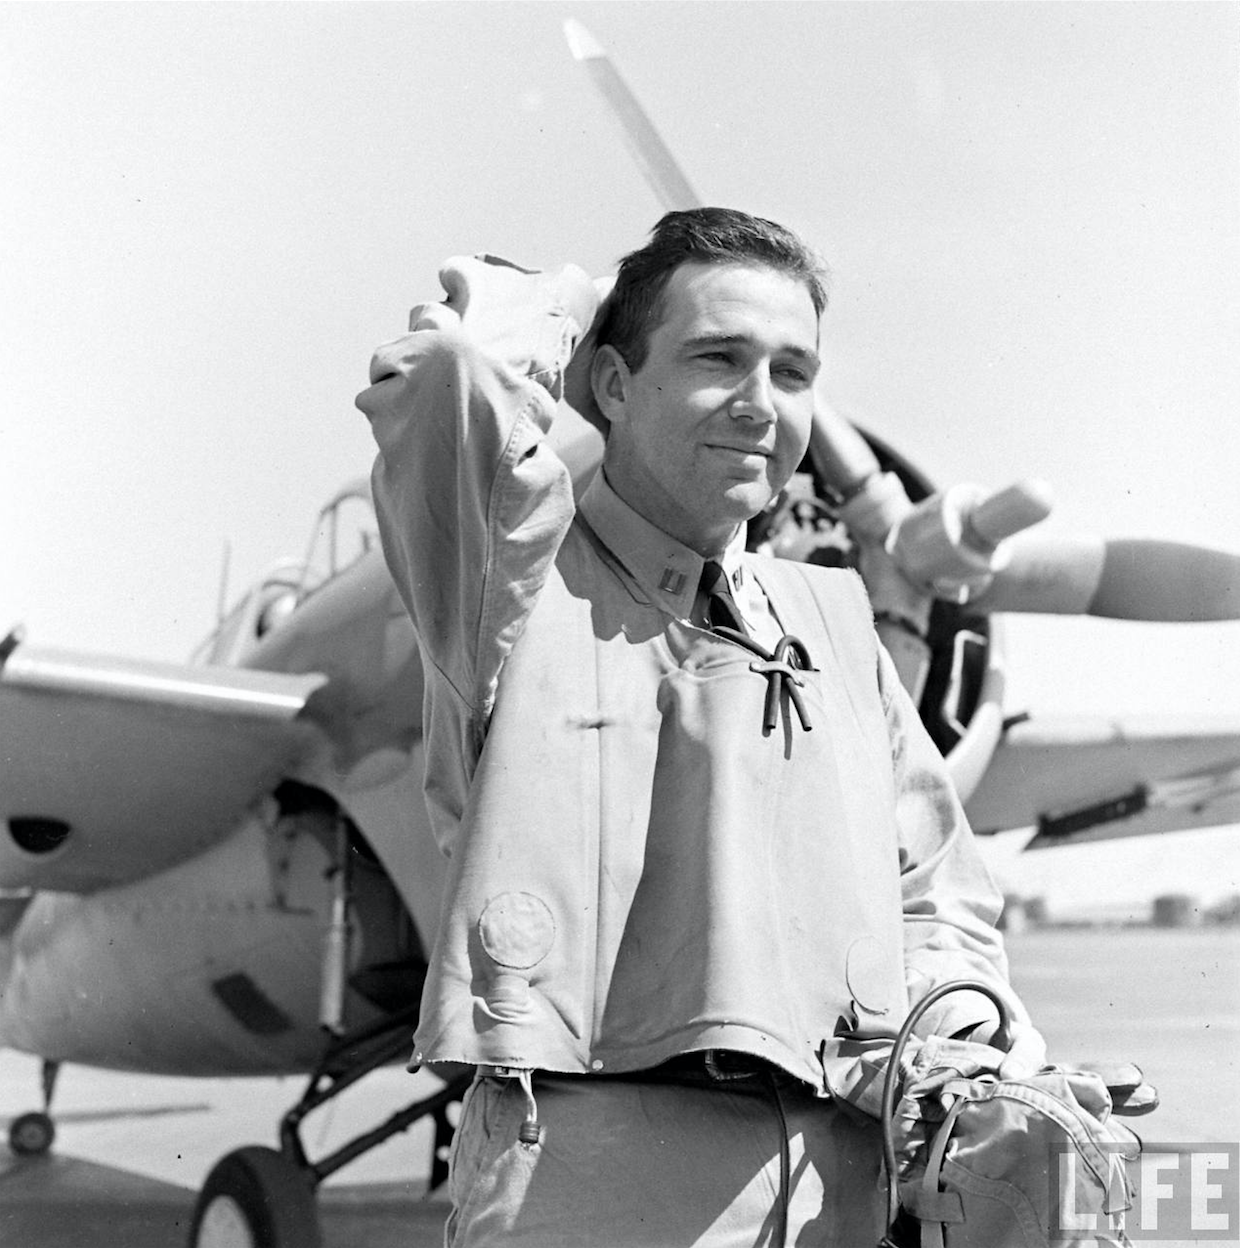 Lieutenant Edward H. O'Hare, United States Navy. A Grumman F4F Wildcat is in the background. (LIFE Magazine)